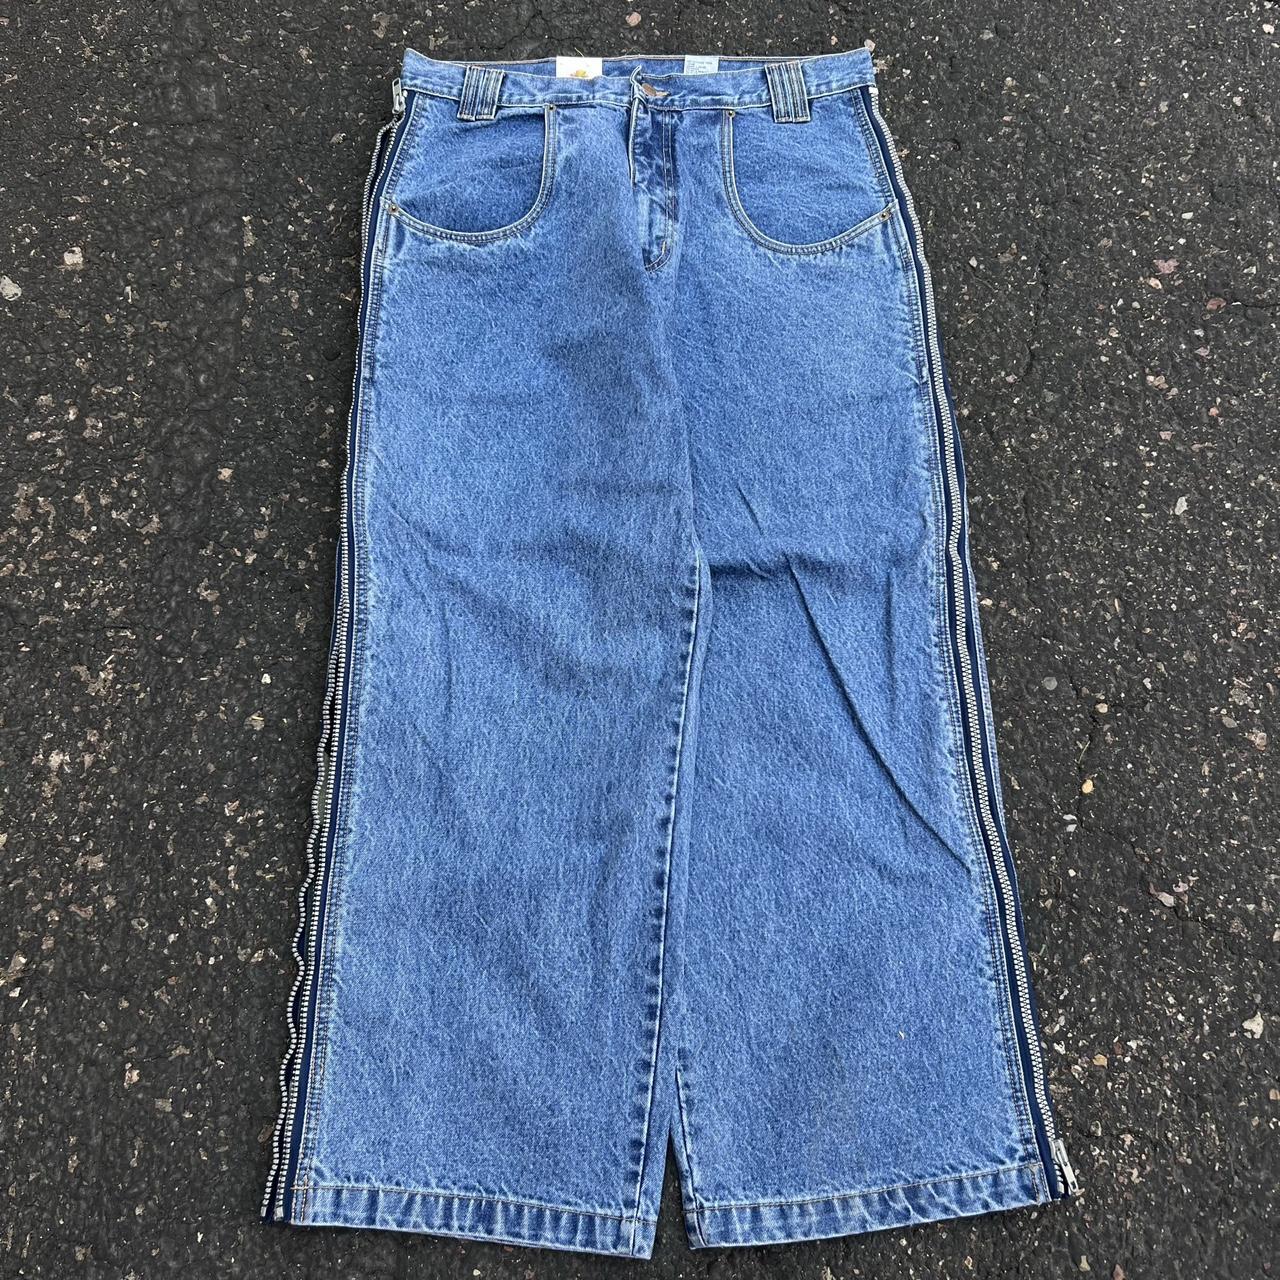 Fire jnco style jeans 14.5 IN LEG OPENING. These... - Depop